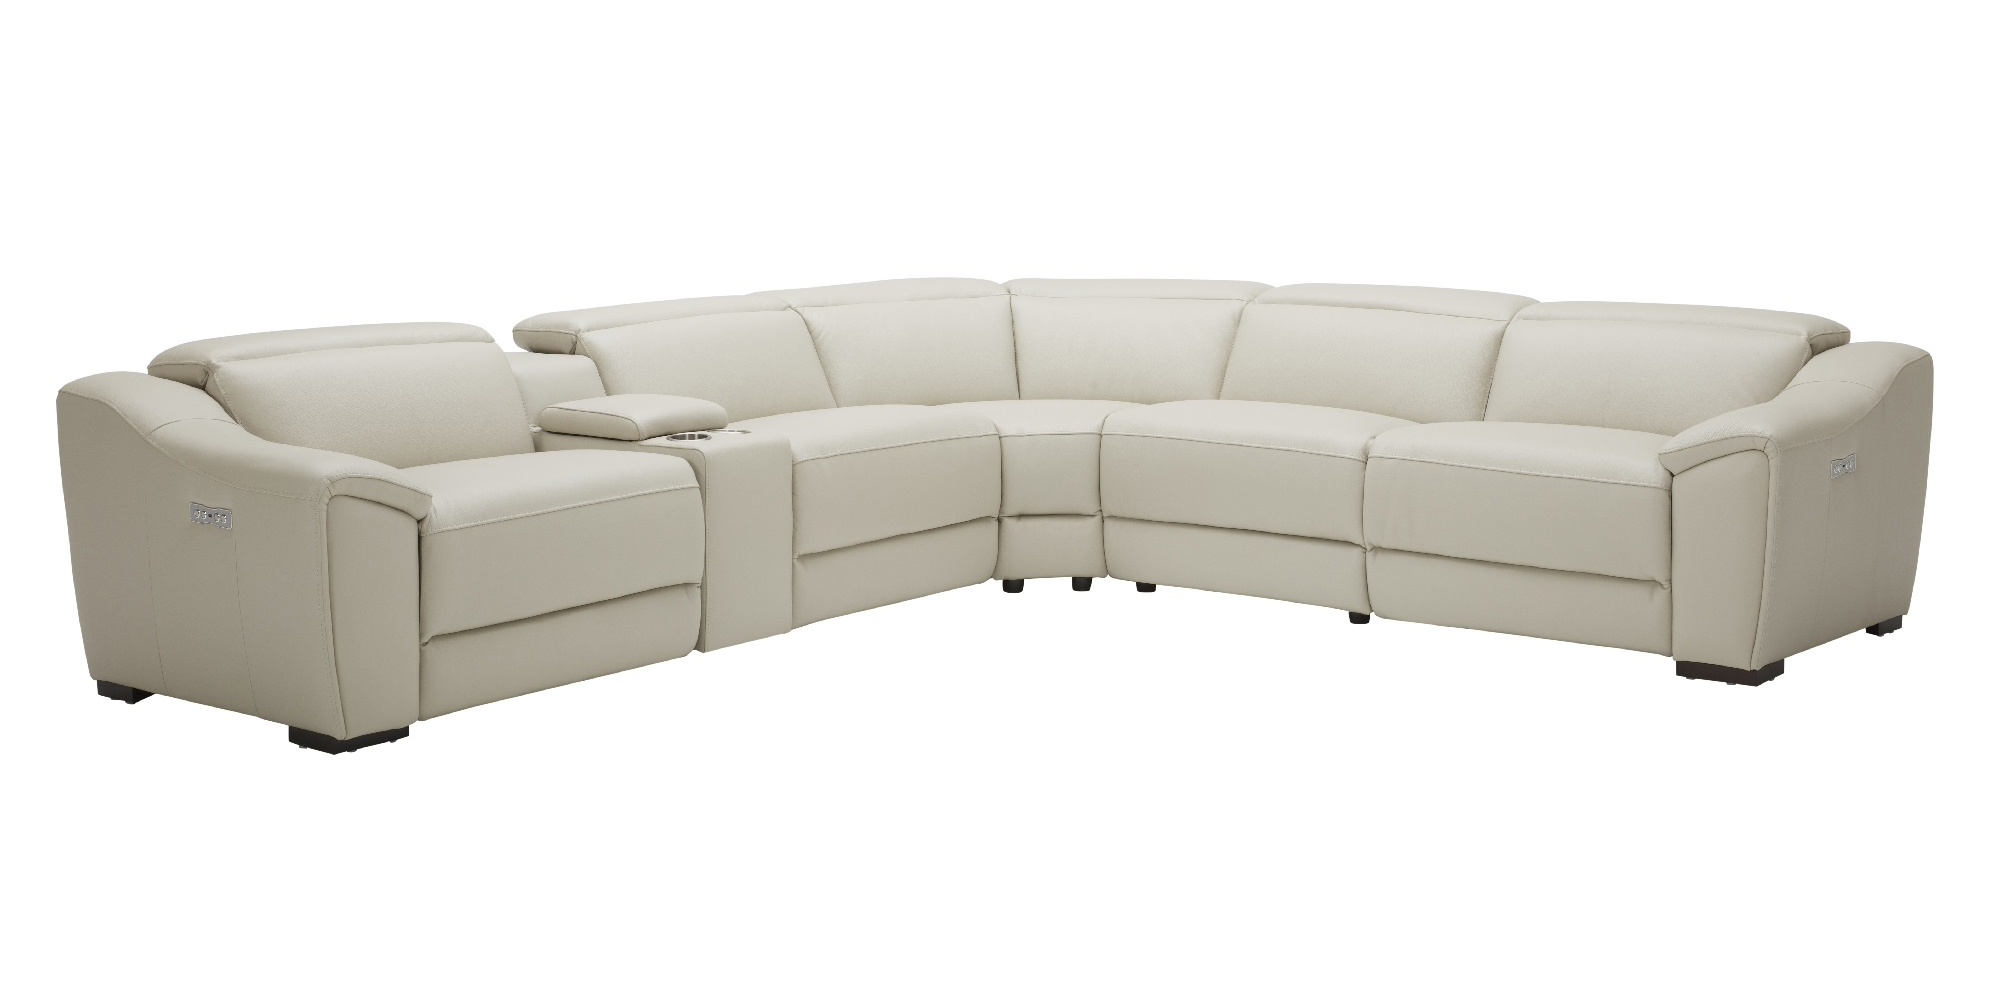 High-class Italian Leather Sectional Sofa - Click Image to Close